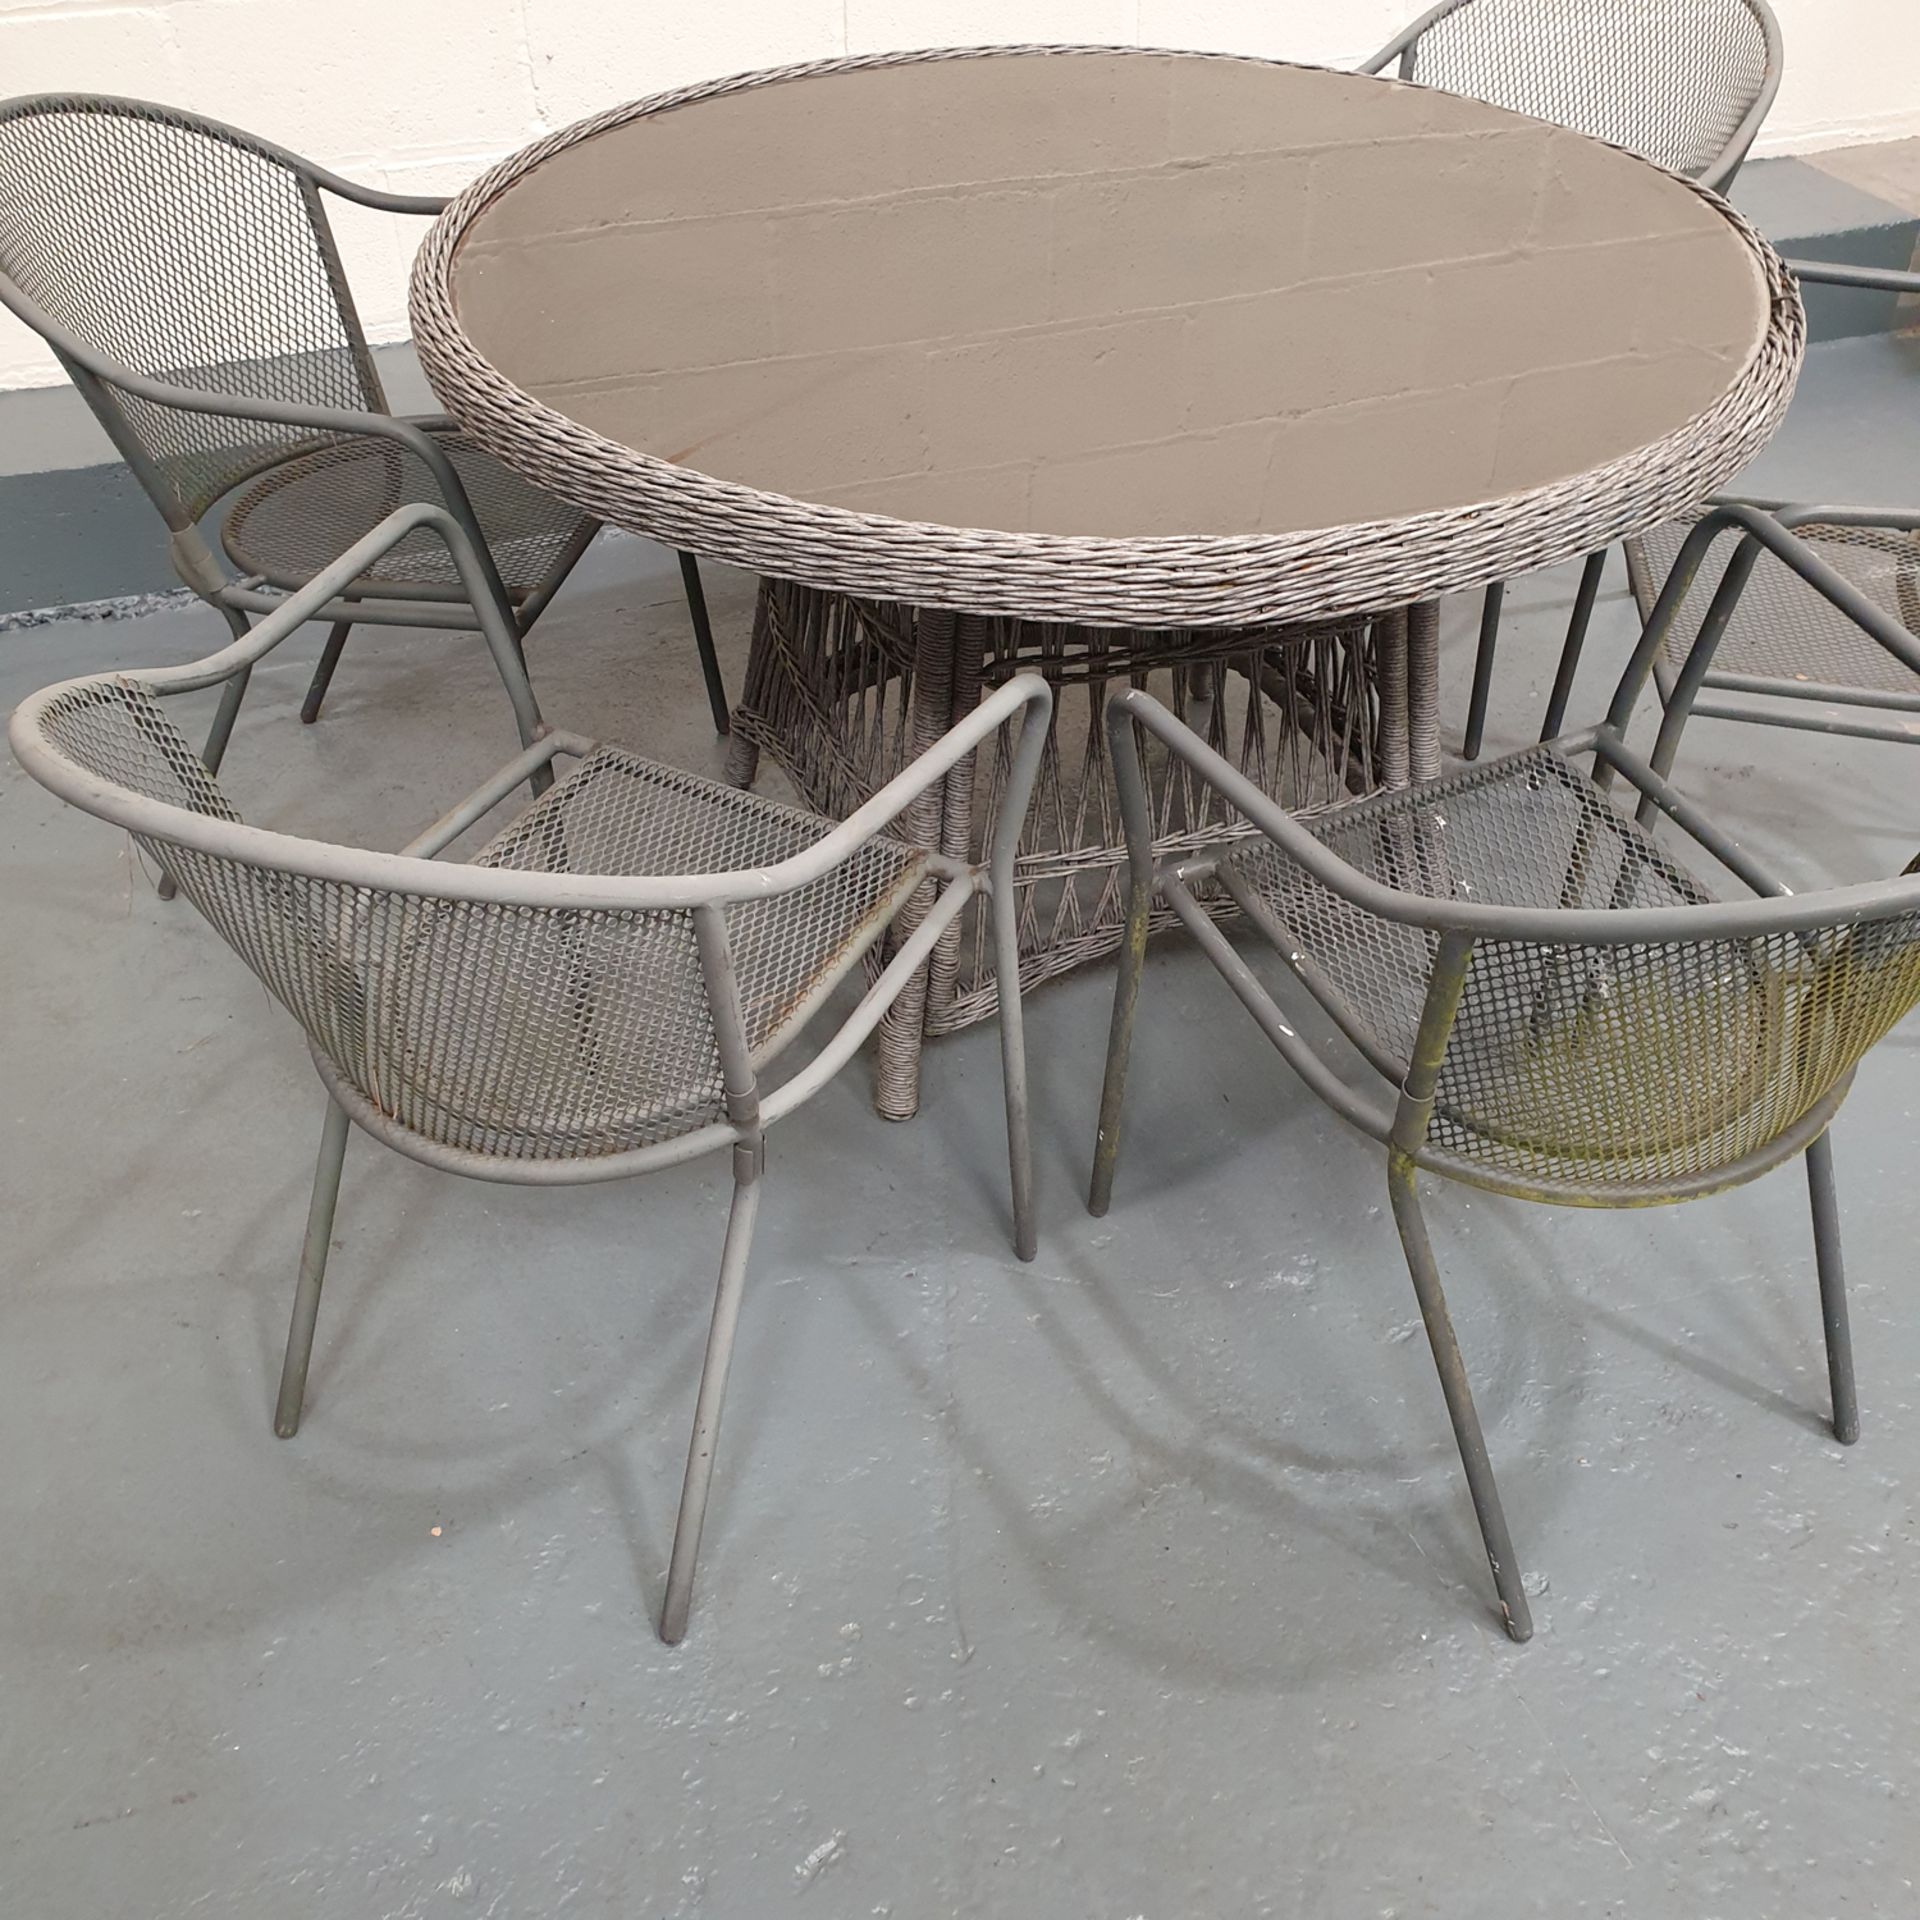 Outdoor Table with Glass Top. 5 x Metal Chairs. - Image 4 of 5